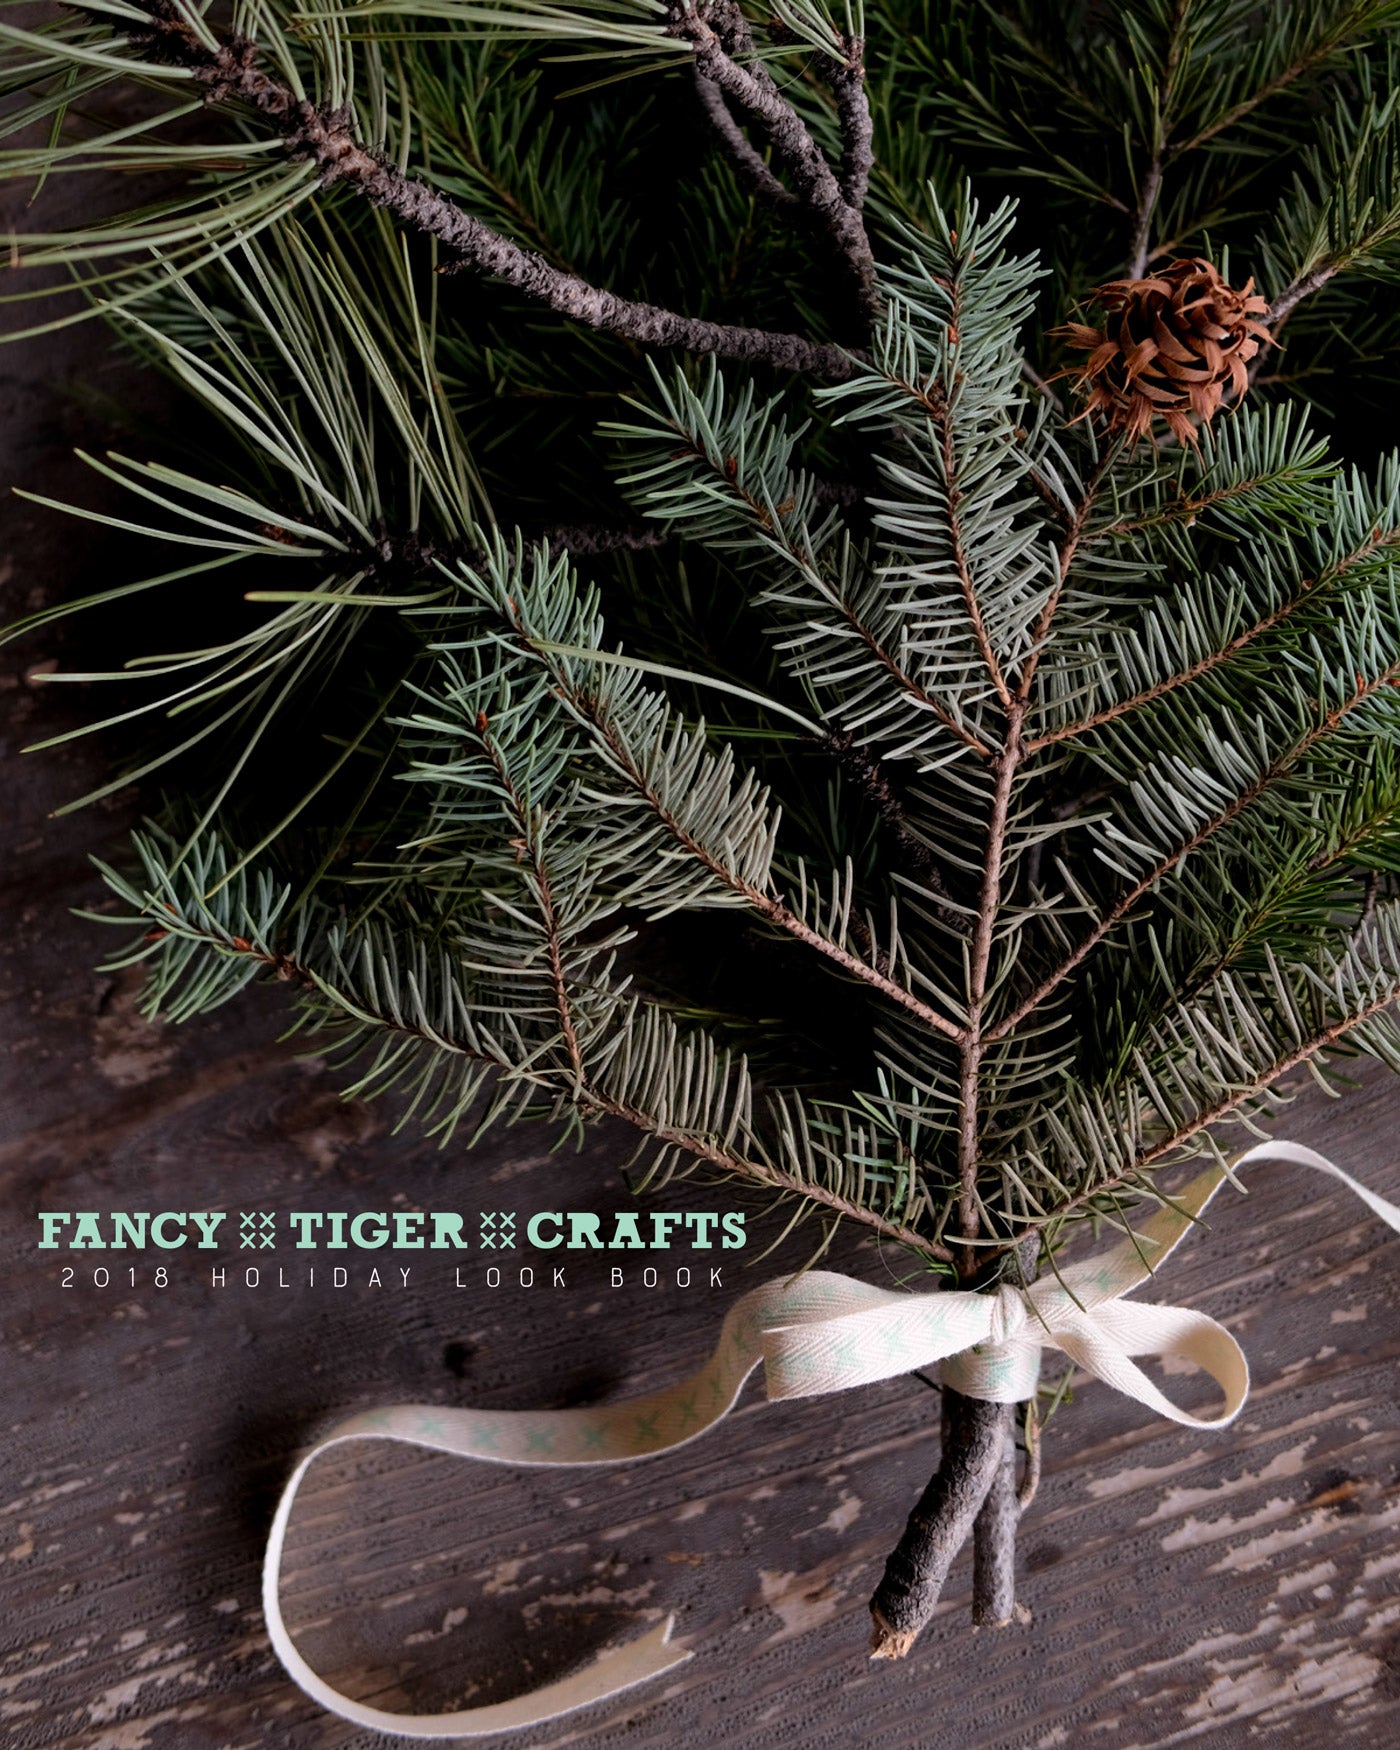 Fancy Tiger Crafts 2018 Holiday Look Book